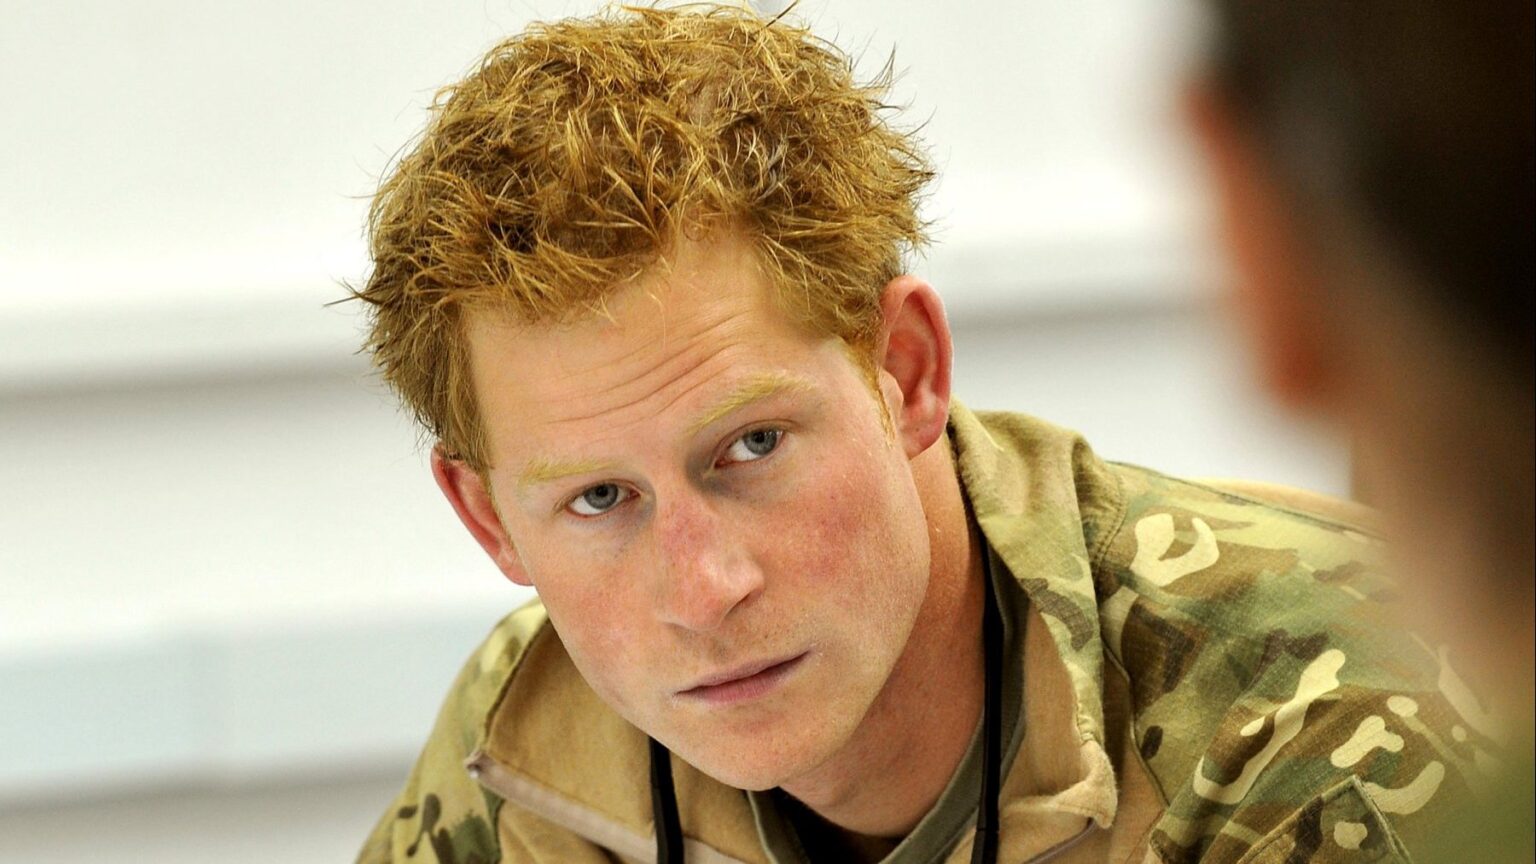 Iran accuses Prince Harry of ‘war crime’ as regime condemned over diplomat’s execution